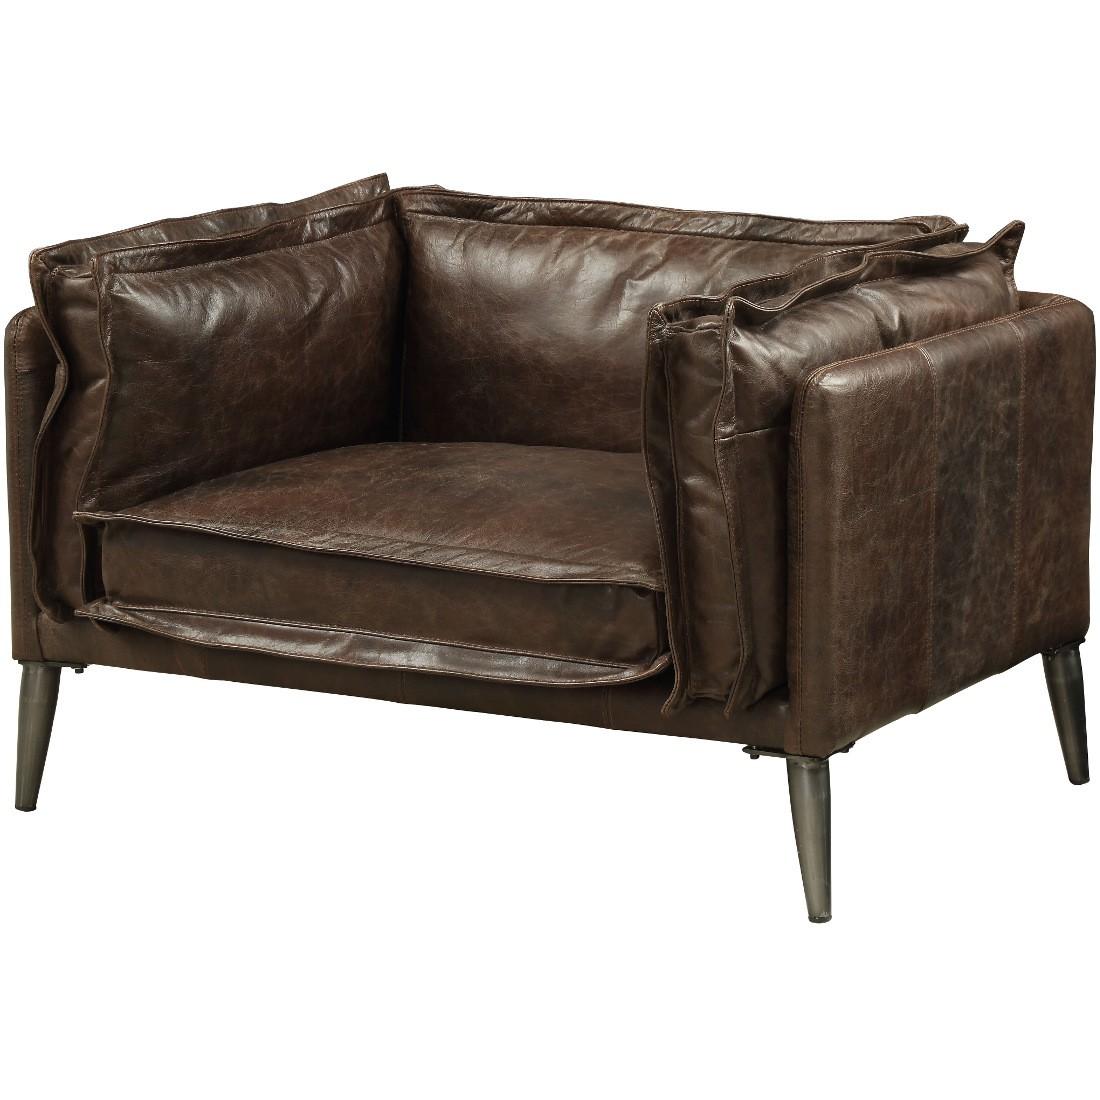 

        
Acme Furniture Porchester Sofa Loveseat and Chair Set Chocolate Top grain leather 0840412163494
